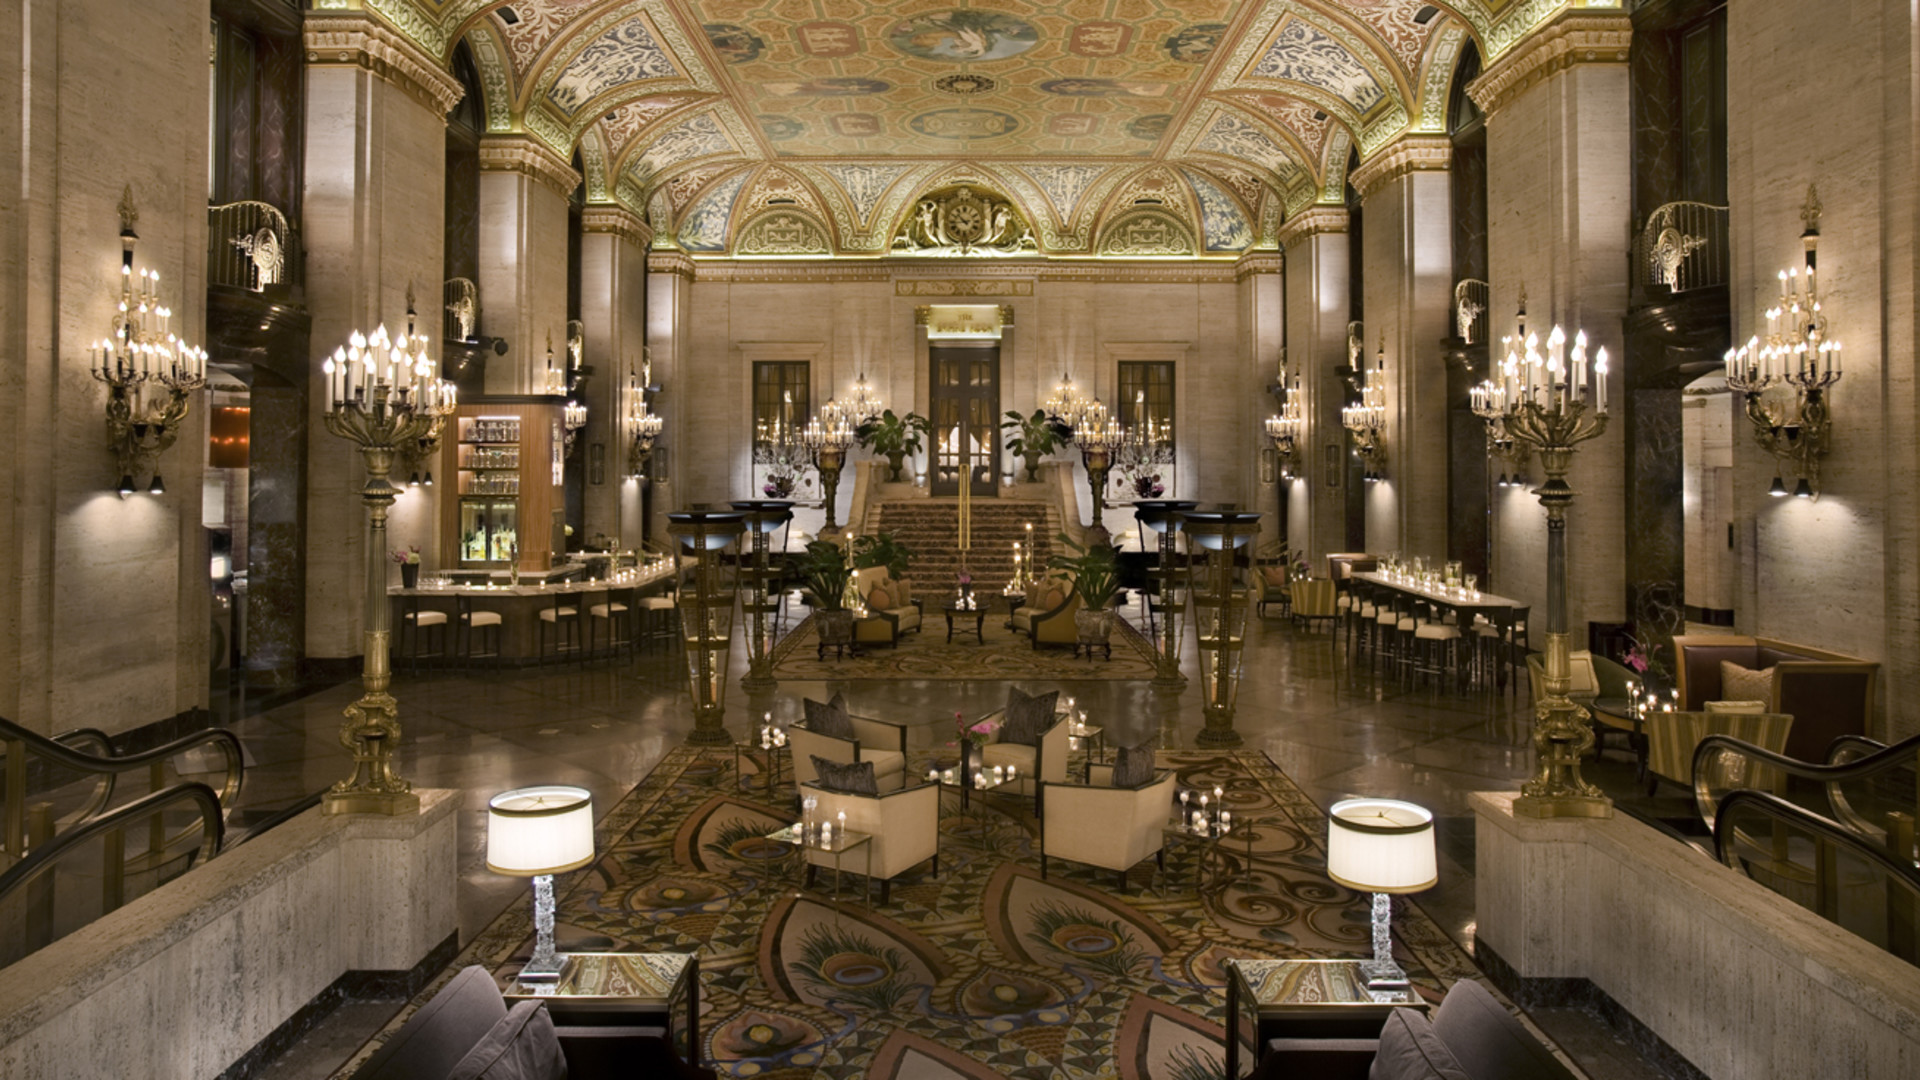 Lobby with High Ceilings and Decorative Lighting